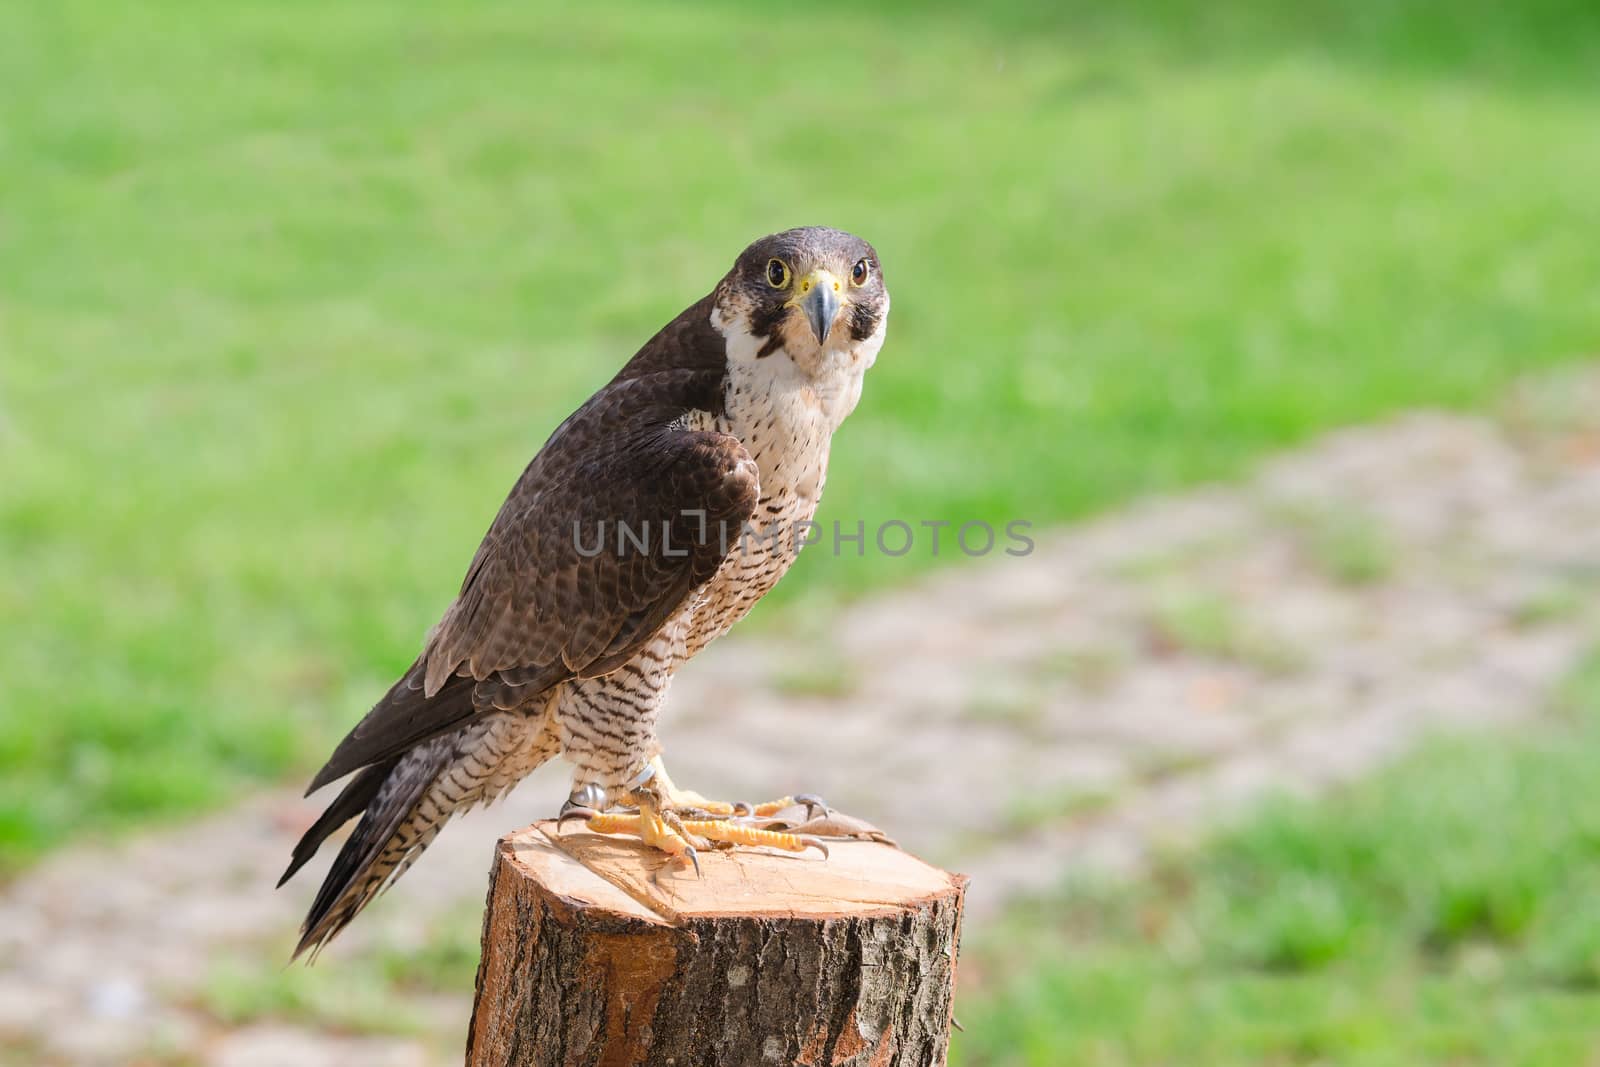 Tamed and trained for hunting fastest bird predator falcon or hawk perched on stump and staring into the camera lens